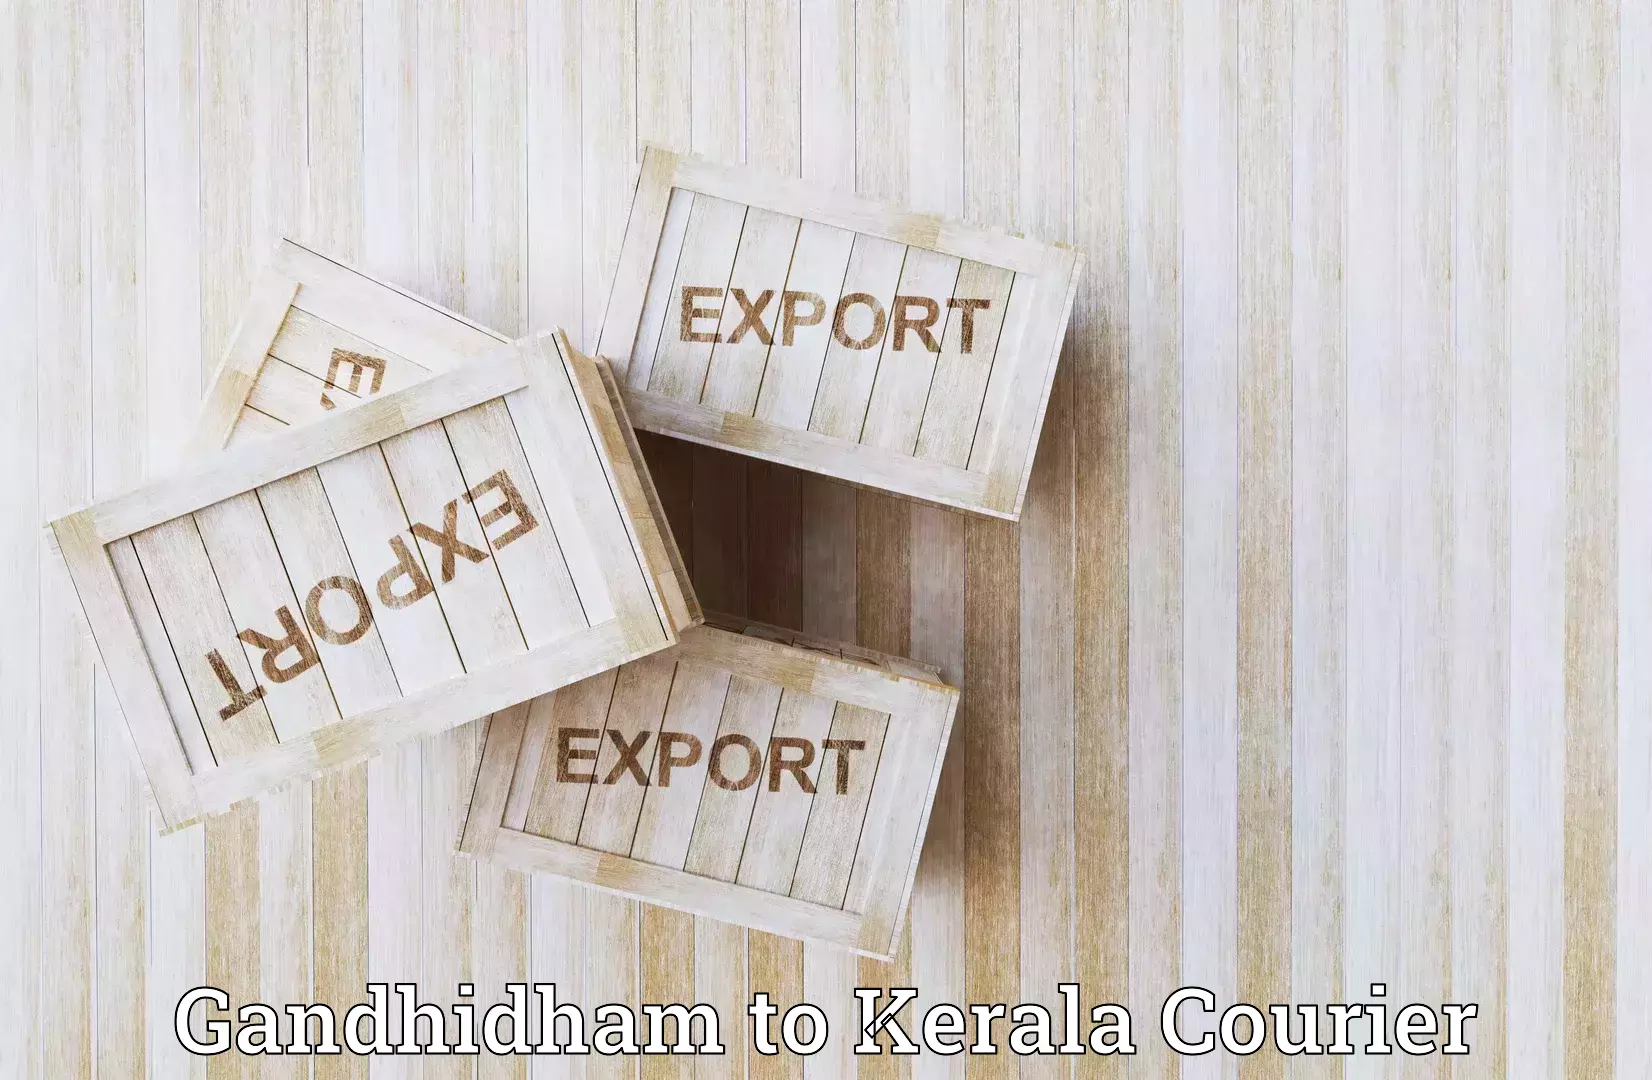 State-of-the-art courier technology Gandhidham to Malappuram